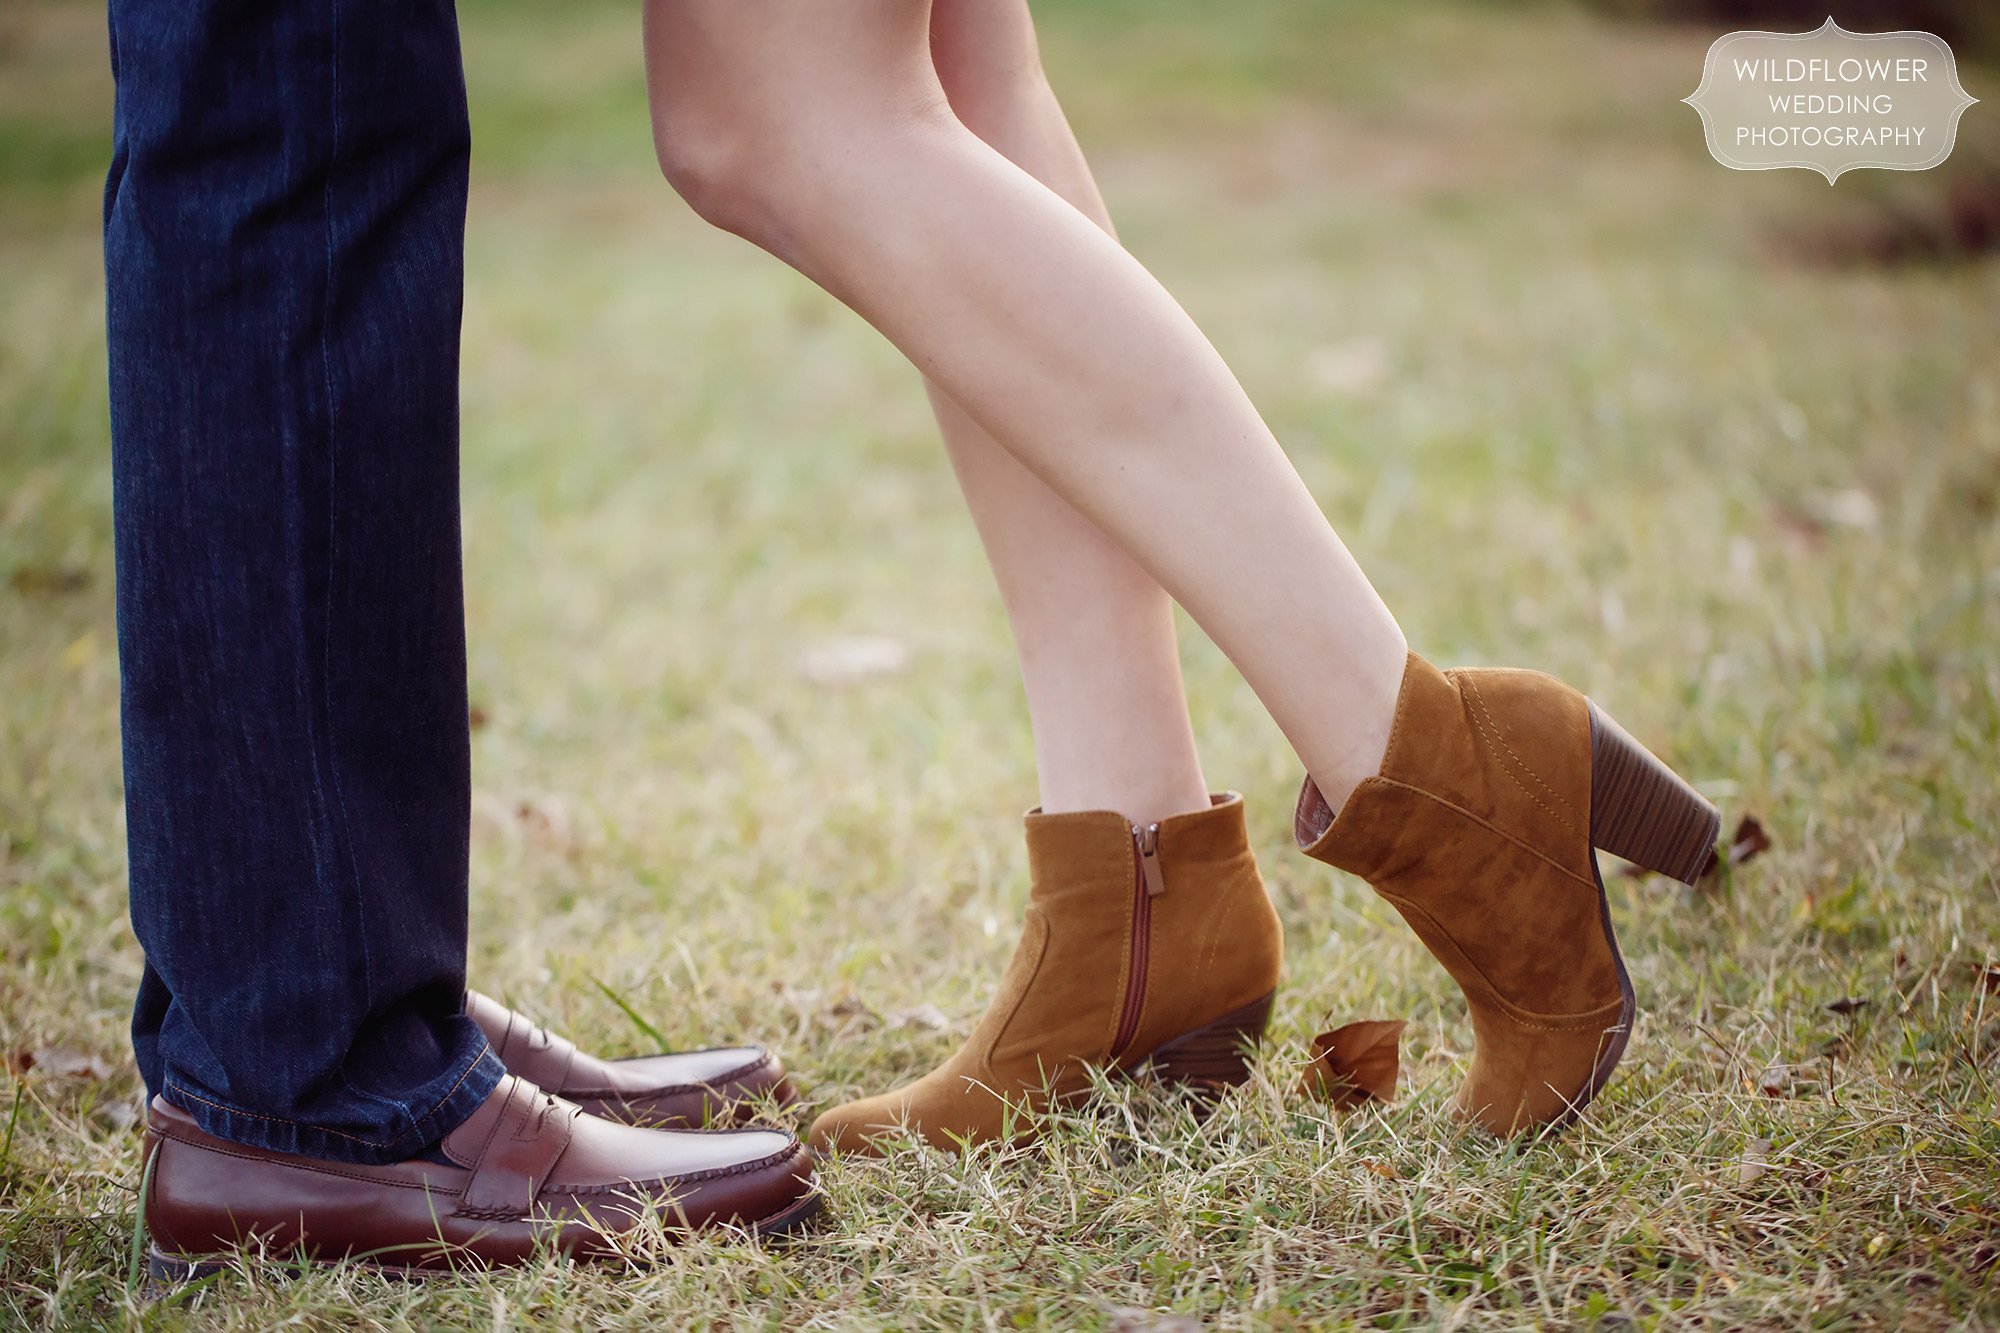 Love these brown leather booties for an Anthropologie engagement photography outfit idea.